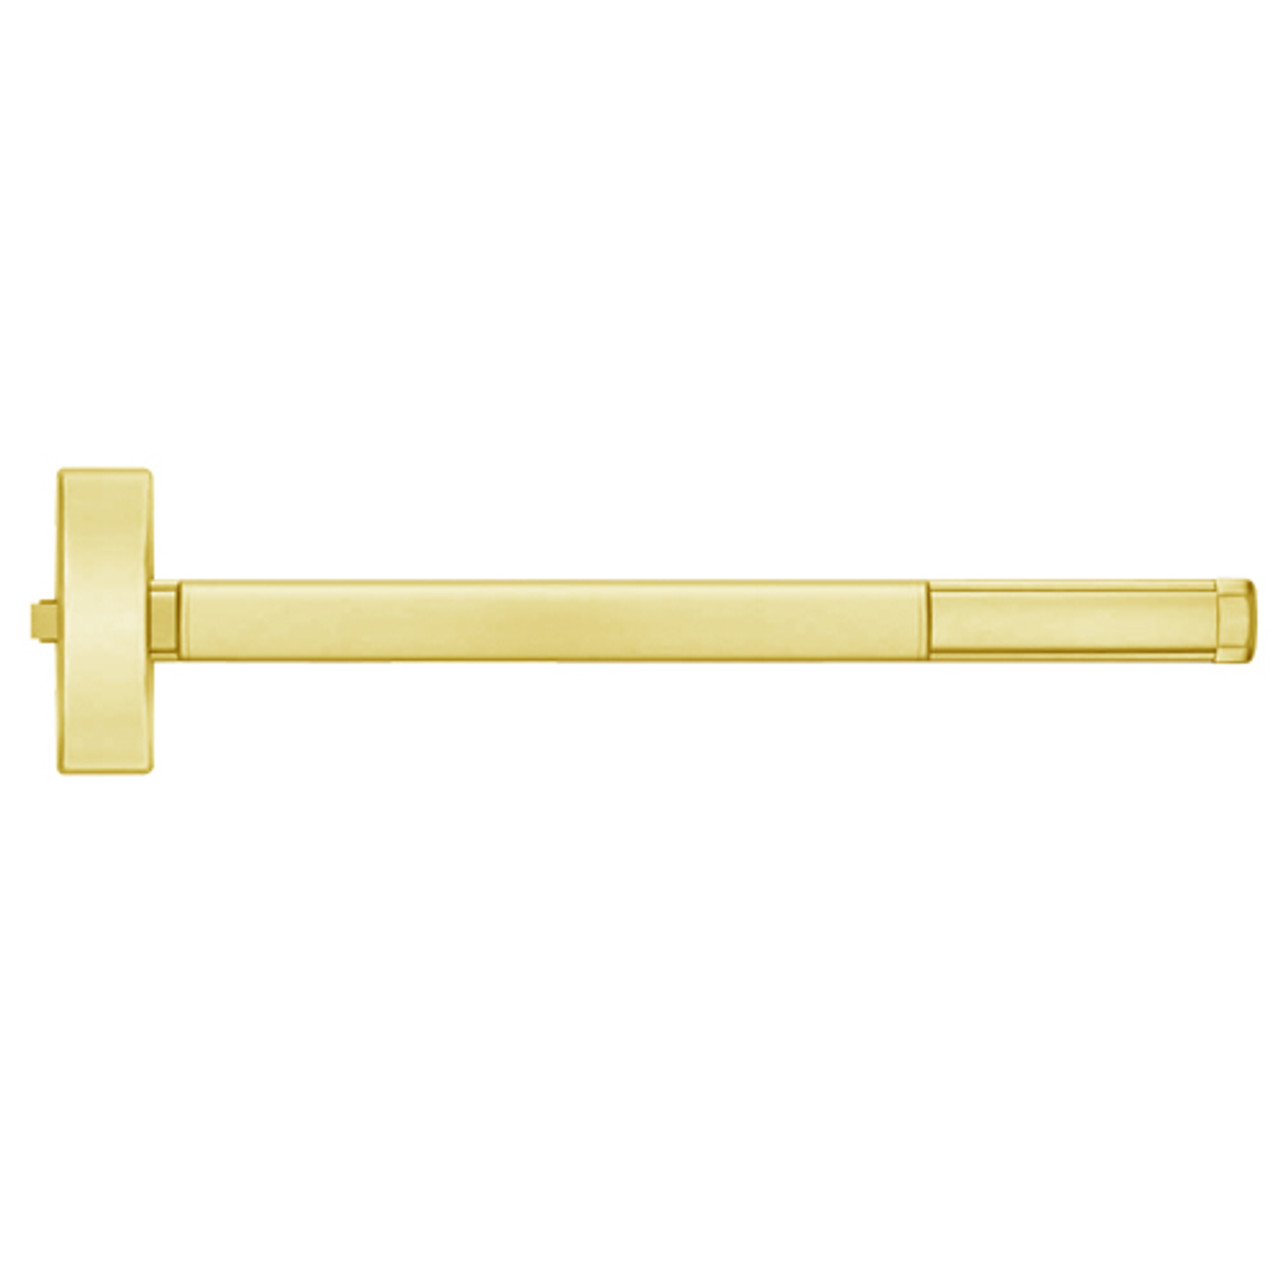 MLRFL2115-605-48 PHI 2100 Series Fire Rated Apex Rim Exit Device with Motorized Latch Retraction Prepped for Thumb Piece Always Active in Bright Brass Finish